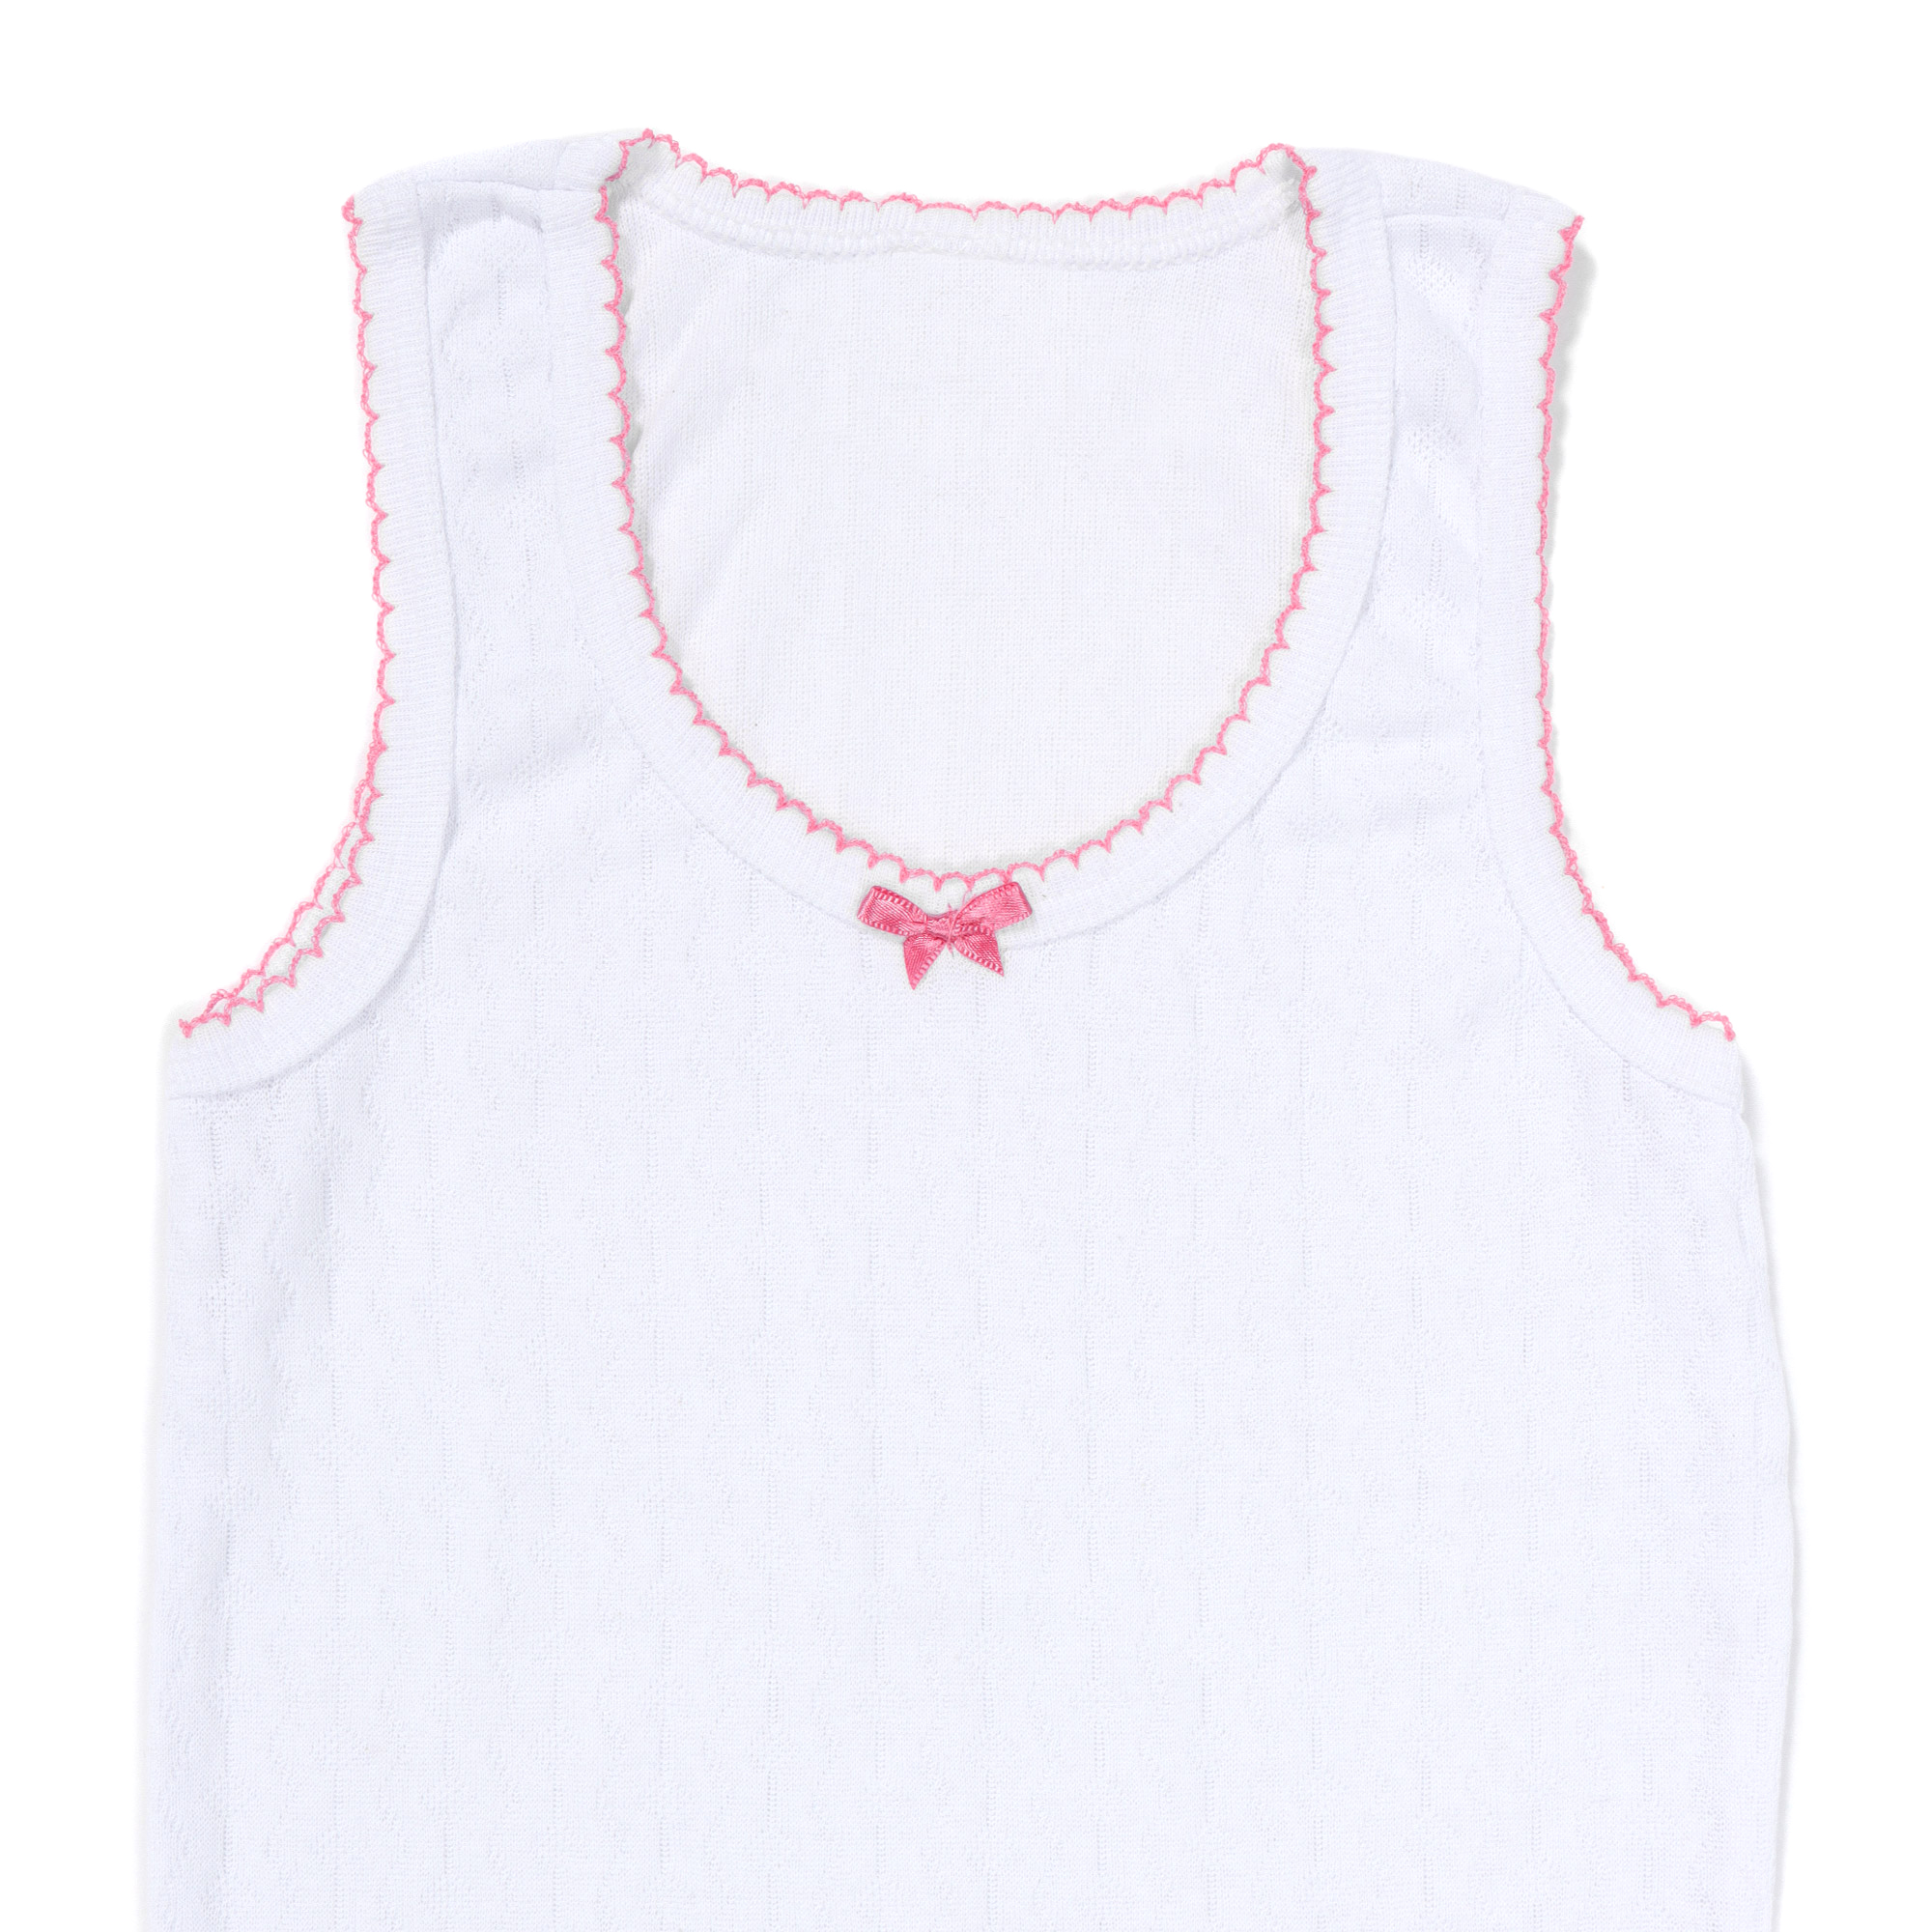 13.-SET-CALZONCITO-Y-BLUSA-2_ag_09